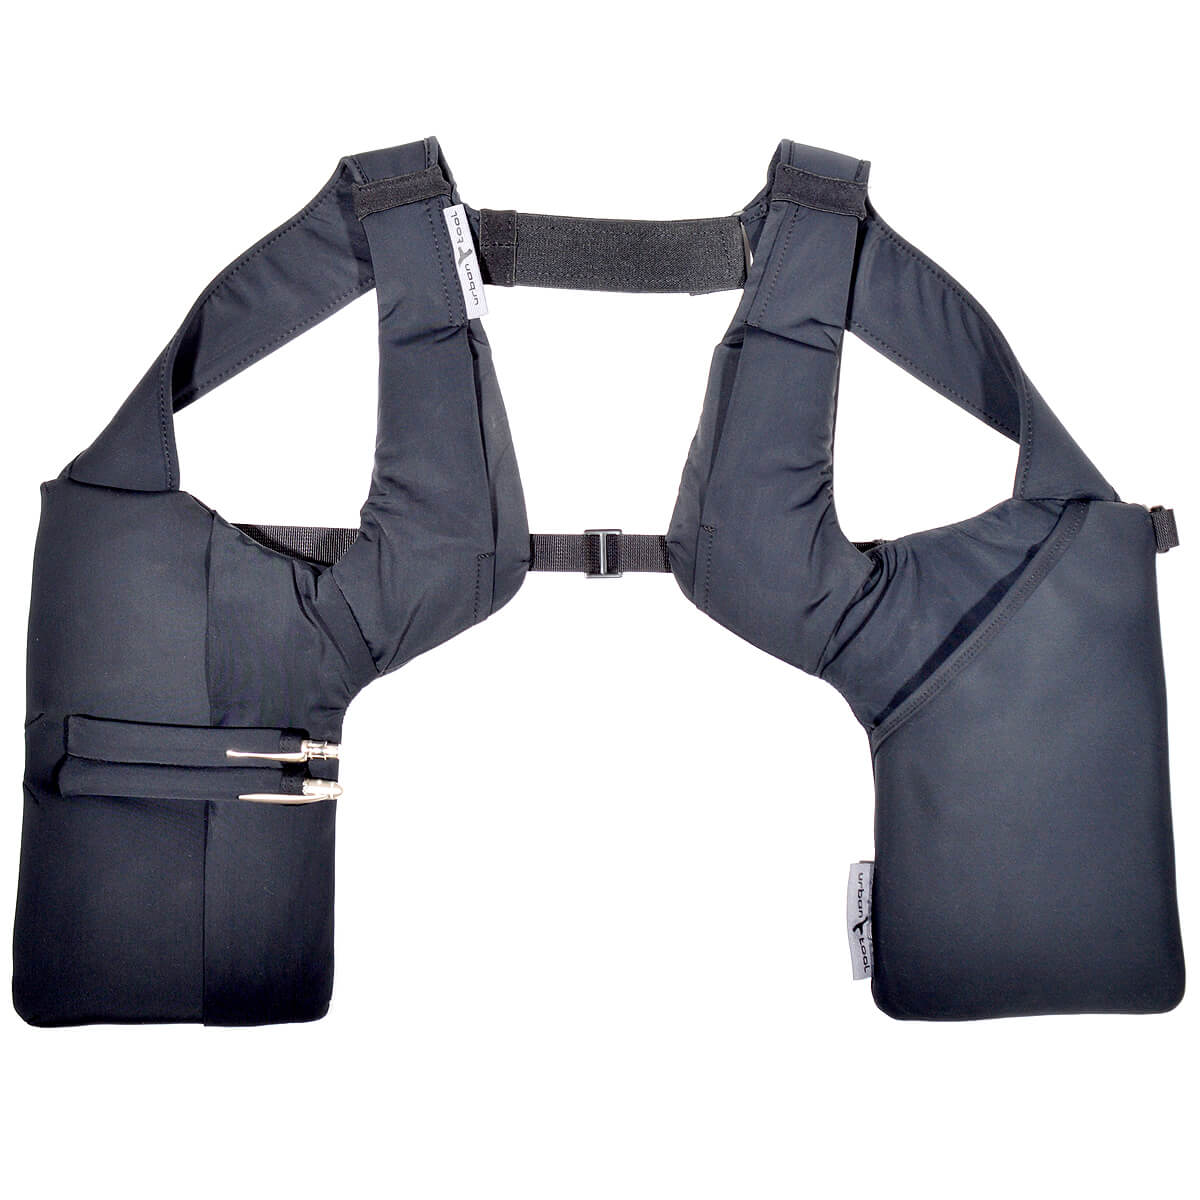 Gadget shoulder holster for day-to-day business activities - URBAN TOOL